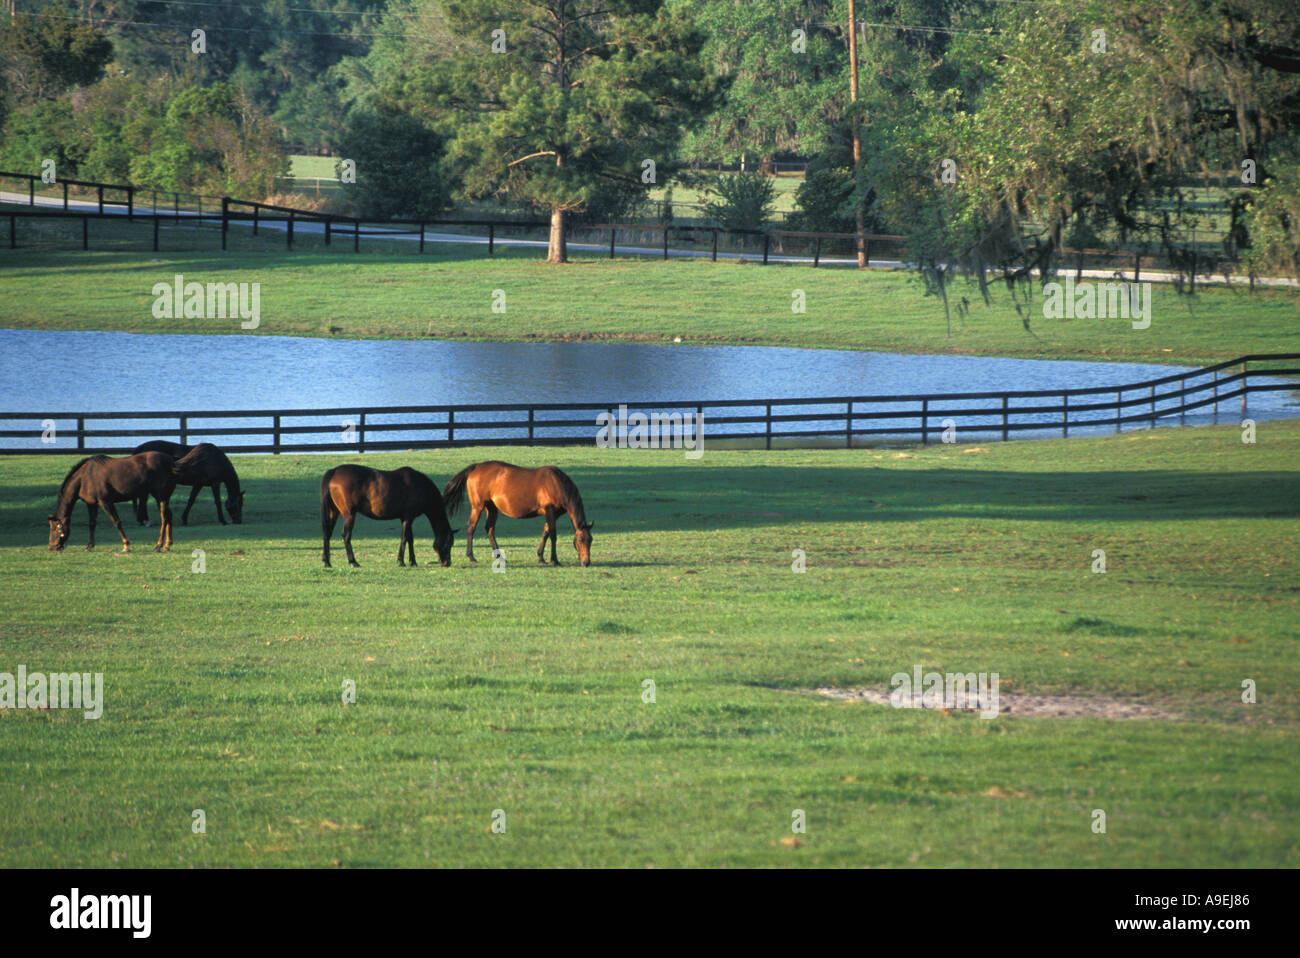 Florida Ocala horse farms thoroughbred racing horses in pasture with pond in background Stock Photo